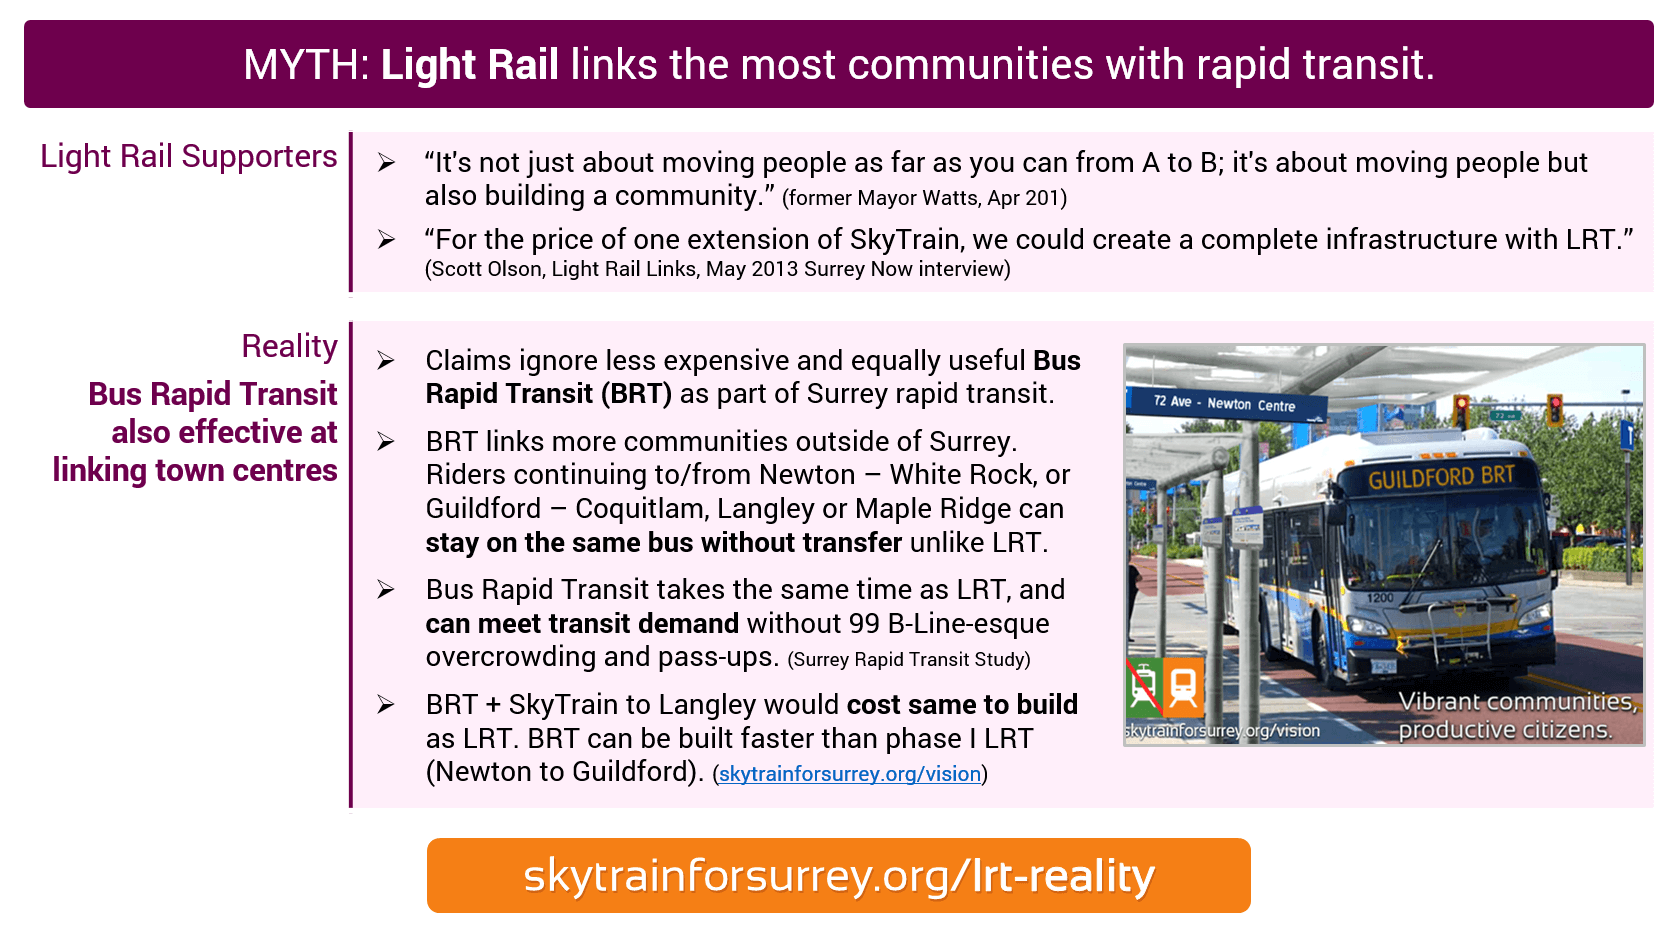 MYTH: Light Rail links the most communities with rapid transit; Reality: Bus Rapid Transit is also effective at linking town centres.